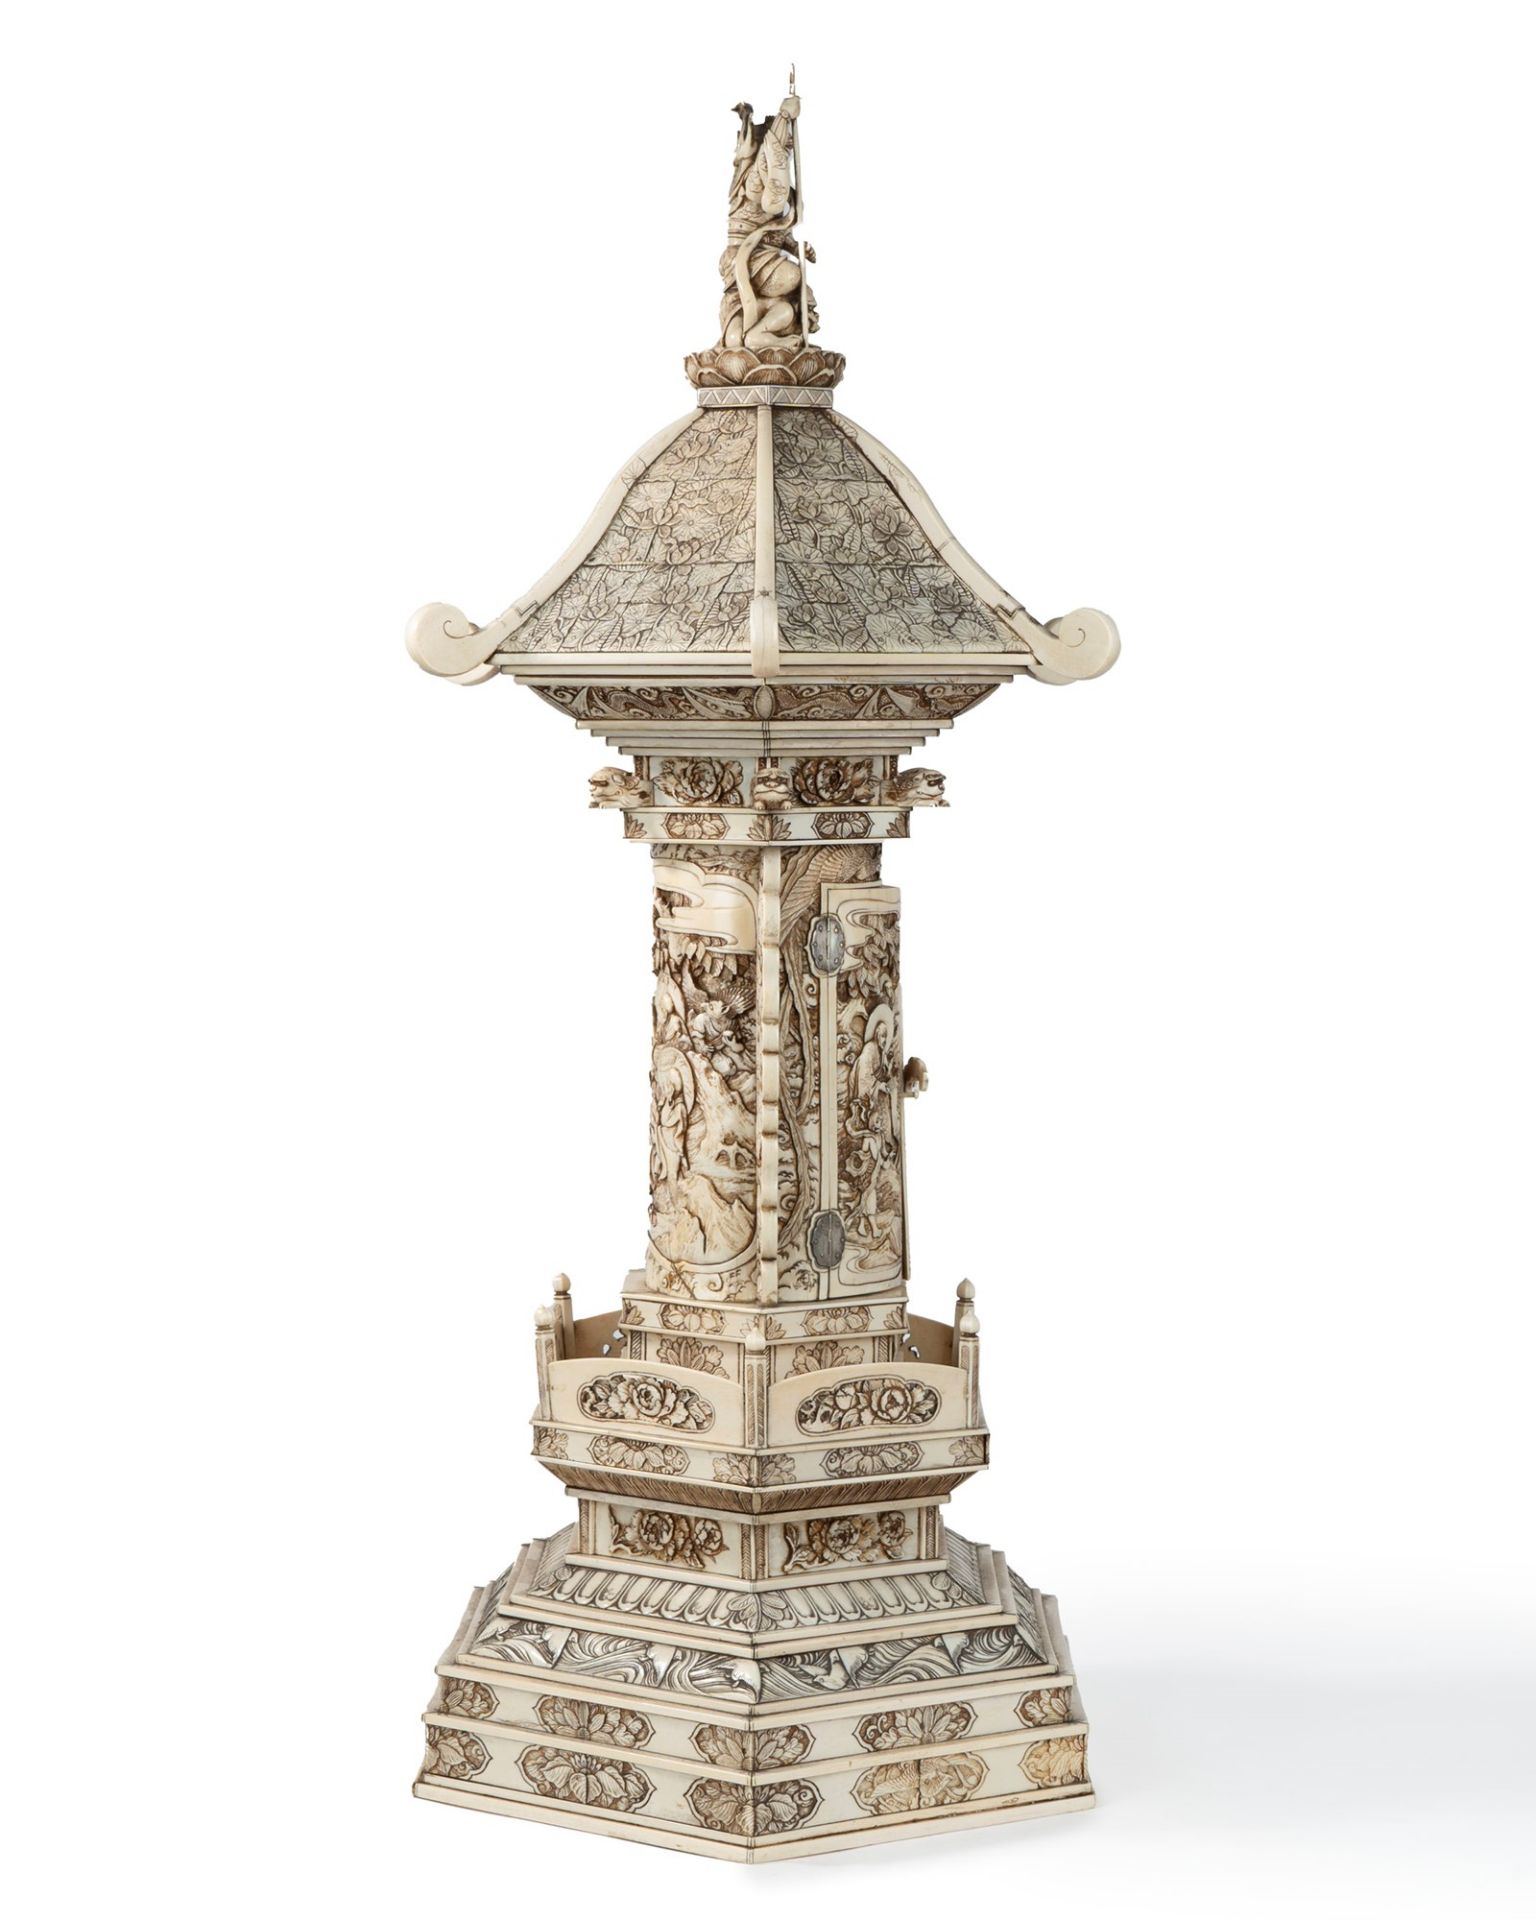 AN IMPORTANT IVORY PAGODA, Japan, Meiji period (1868-1912) - Image 7 of 9